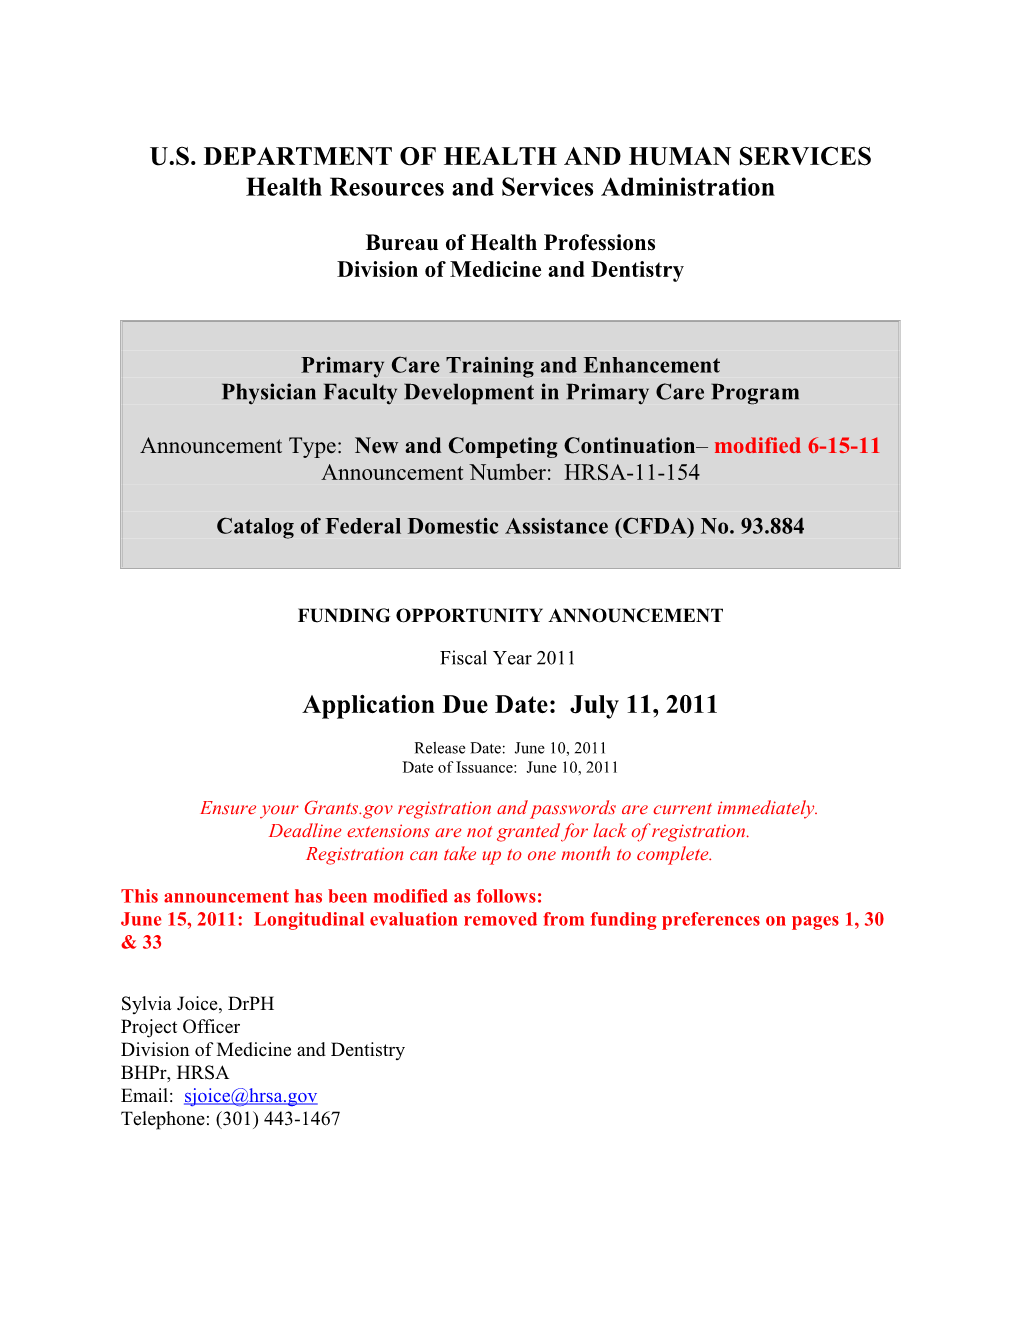 Funding Opportunity Announcement HRSA-11-154